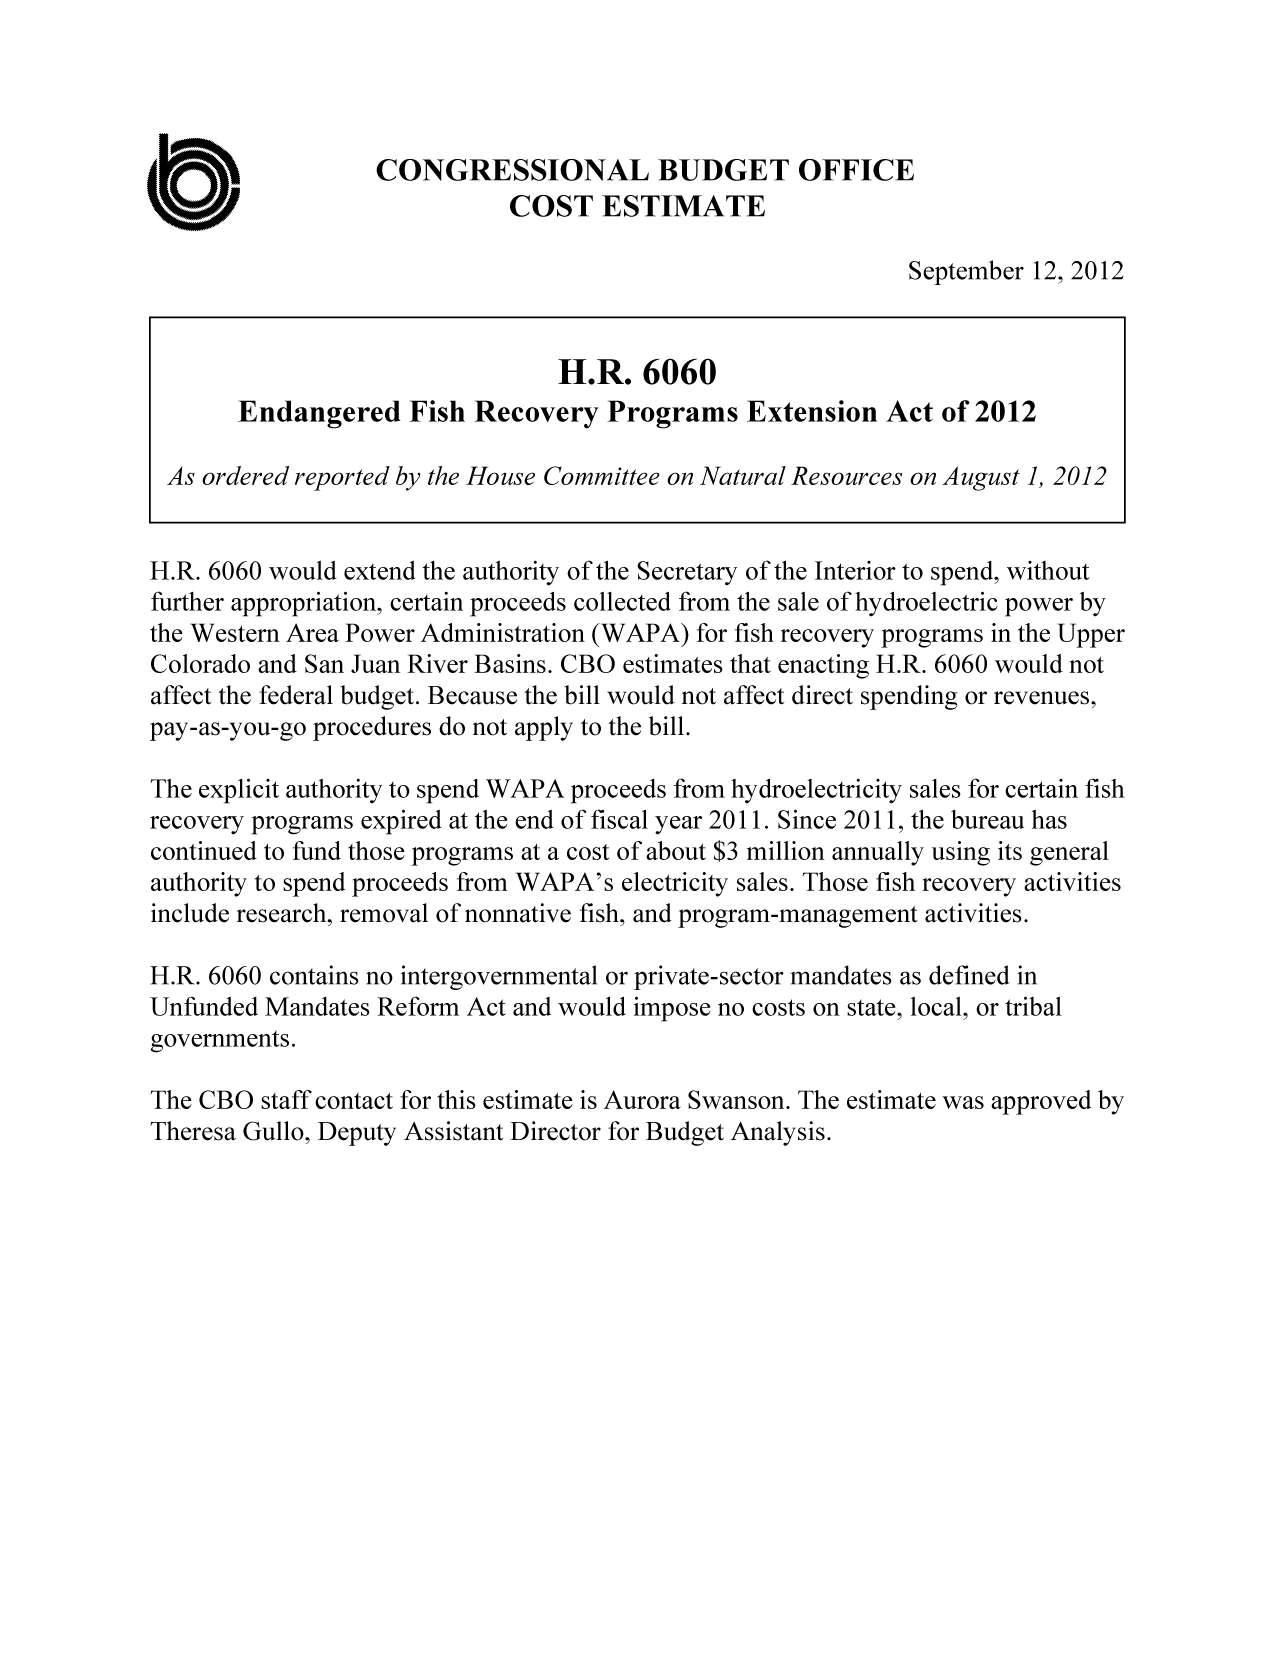 handle is hein.congrec/cbo10898 and id is 1 raw text is: CONGRESSIONAL BUDGET OFFICE
COST ESTIMATE
September 12, 2012
H.R. 6060
Endangered Fish Recovery Programs Extension Act of 2012
As ordered reported by the House Committee on Natural Resources on August1, 2012
H.R. 6060 would extend the authority of the Secretary of the Interior to spend, without
further appropriation, certain proceeds collected from the sale of hydroelectric power by
the Western Area Power Administration (WAPA) for fish recovery programs in the Upper
Colorado and San Juan River Basins. CBO estimates that enacting H.R. 6060 would not
affect the federal budget. Because the bill would not affect direct spending or revenues,
pay-as-you-go procedures do not apply to the bill.
The explicit authority to spend WAPA proceeds from hydroelectricity sales for certain fish
recovery programs expired at the end of fiscal year 2011. Since 2011, the bureau has
continued to fund those programs at a cost of about $3 million annually using its general
authority to spend proceeds from WAPA's electricity sales. Those fish recovery activities
include research, removal of nonnative fish, and program-management activities.
H.R. 6060 contains no intergovernmental or private-sector mandates as defined in
Unfunded Mandates Reform Act and would impose no costs on state, local, or tribal
governments.
The CBO staff contact for this estimate is Aurora Swanson. The estimate was approved by
Theresa Gullo, Deputy Assistant Director for Budget Analysis.


